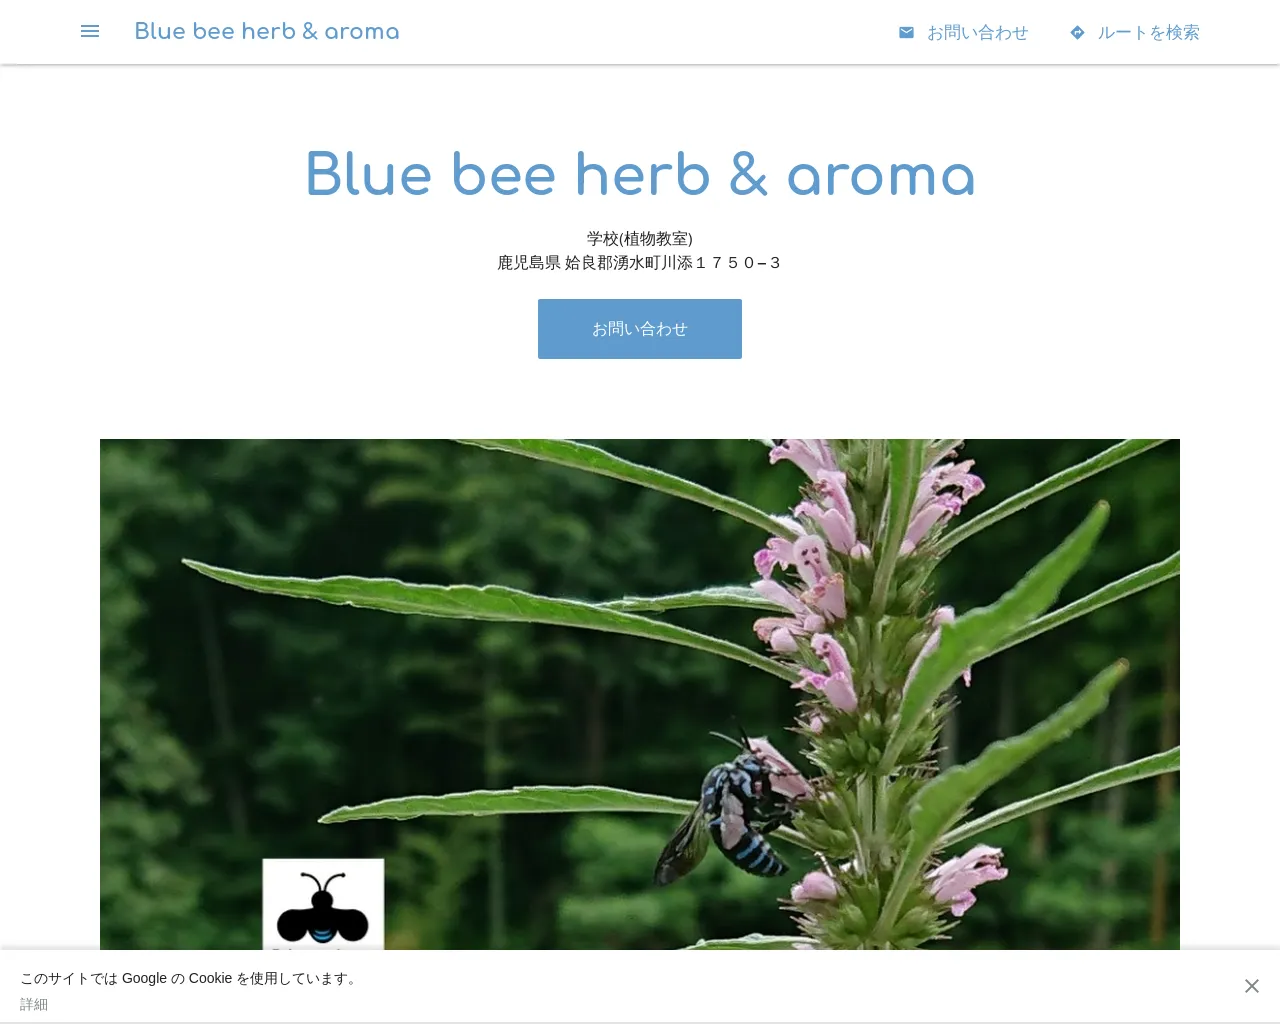 Blue bee herb & aroma site